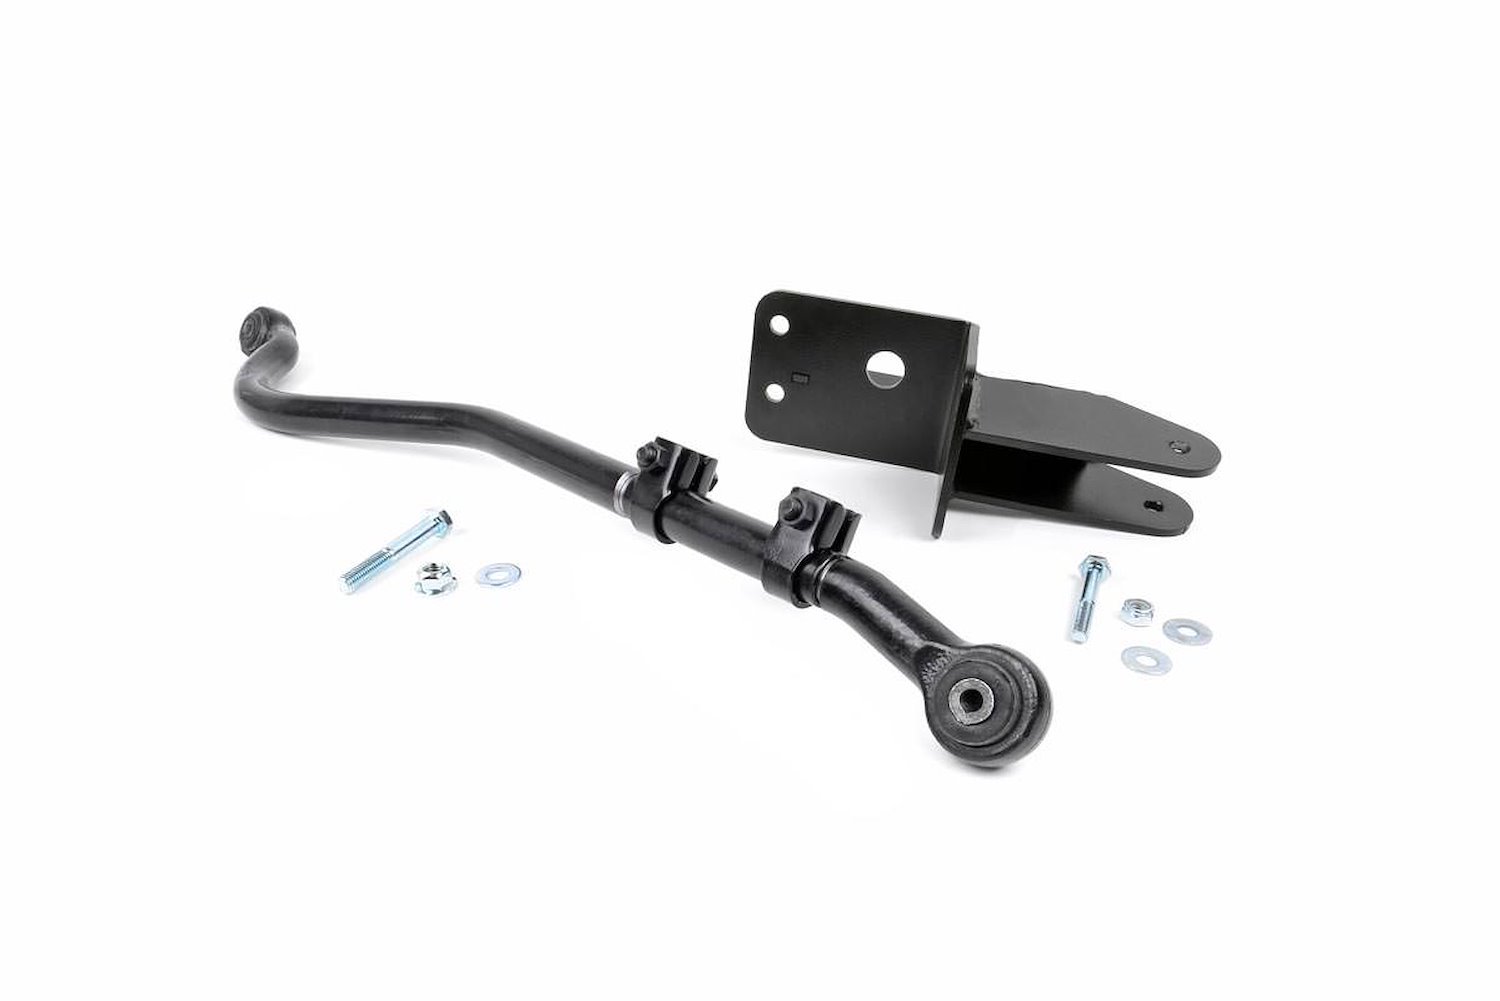 1181 Front Forged Adjustable Track Bar for 0-3.5-inch Lifts